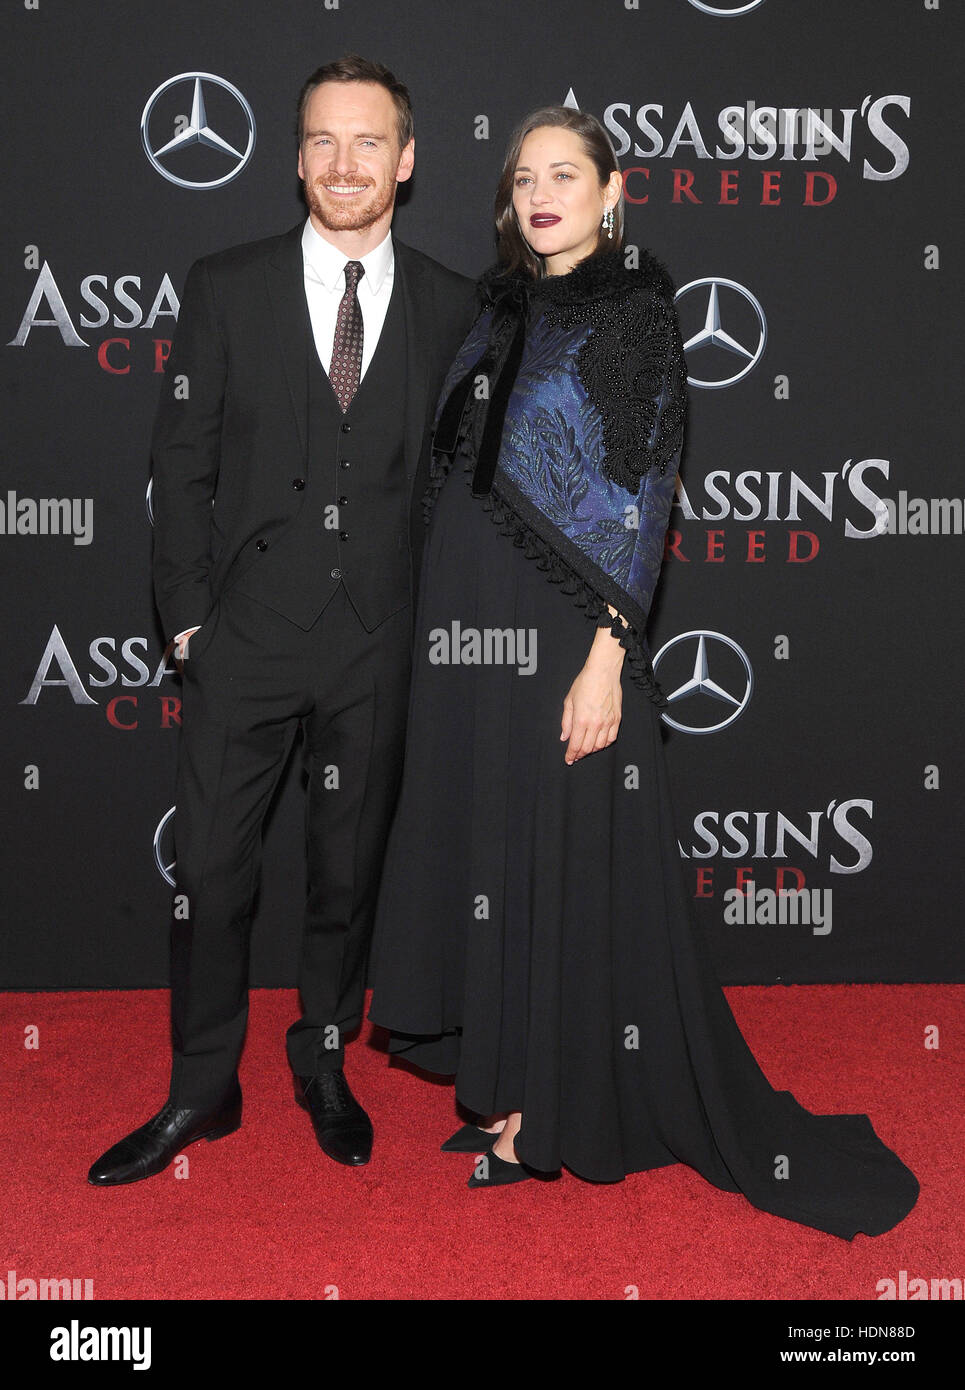 New York, USA. 13th December, 2016. Actress Marion Cotillard and Michael attends the 'Assassin's Creed' New York premiere at AMC Empire 25 theater on December 13, 2016 in New York City.Photo by: John Palmer/MediaPunch Credit:  MediaPunch Inc/Alamy Live News Stock Photo